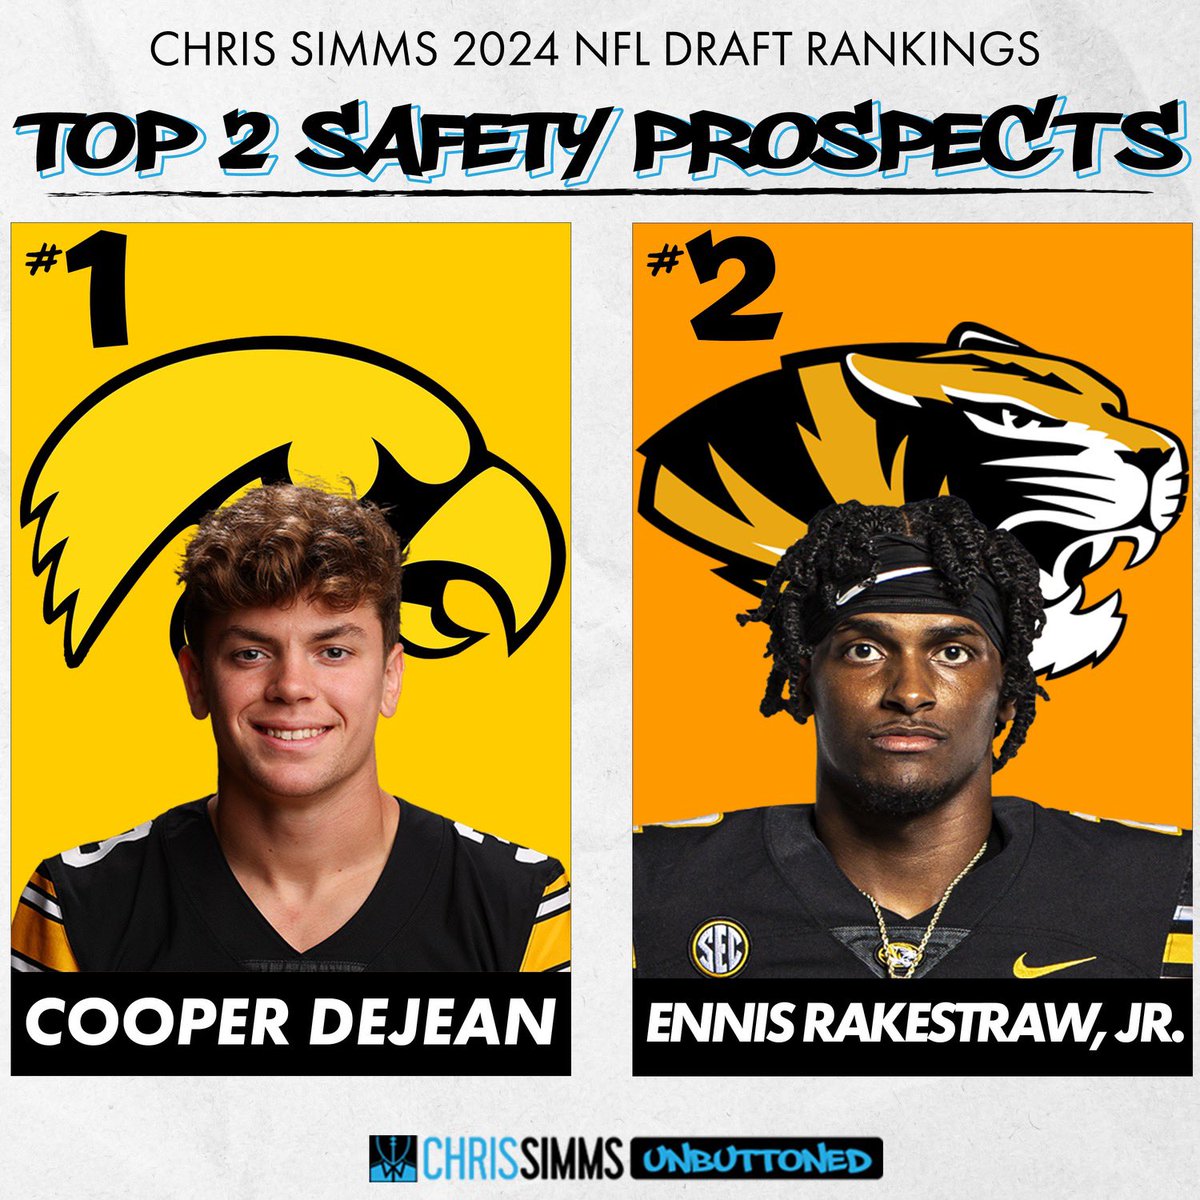 Cooper DeJean and Ennis Rakestraw Jr played CB but are better suited for Safety in the NFL. DeJean has straightaway speed and is physical but doesn’t change direction all that well. Rakestraw has good hips but the not straight speed needed at CB